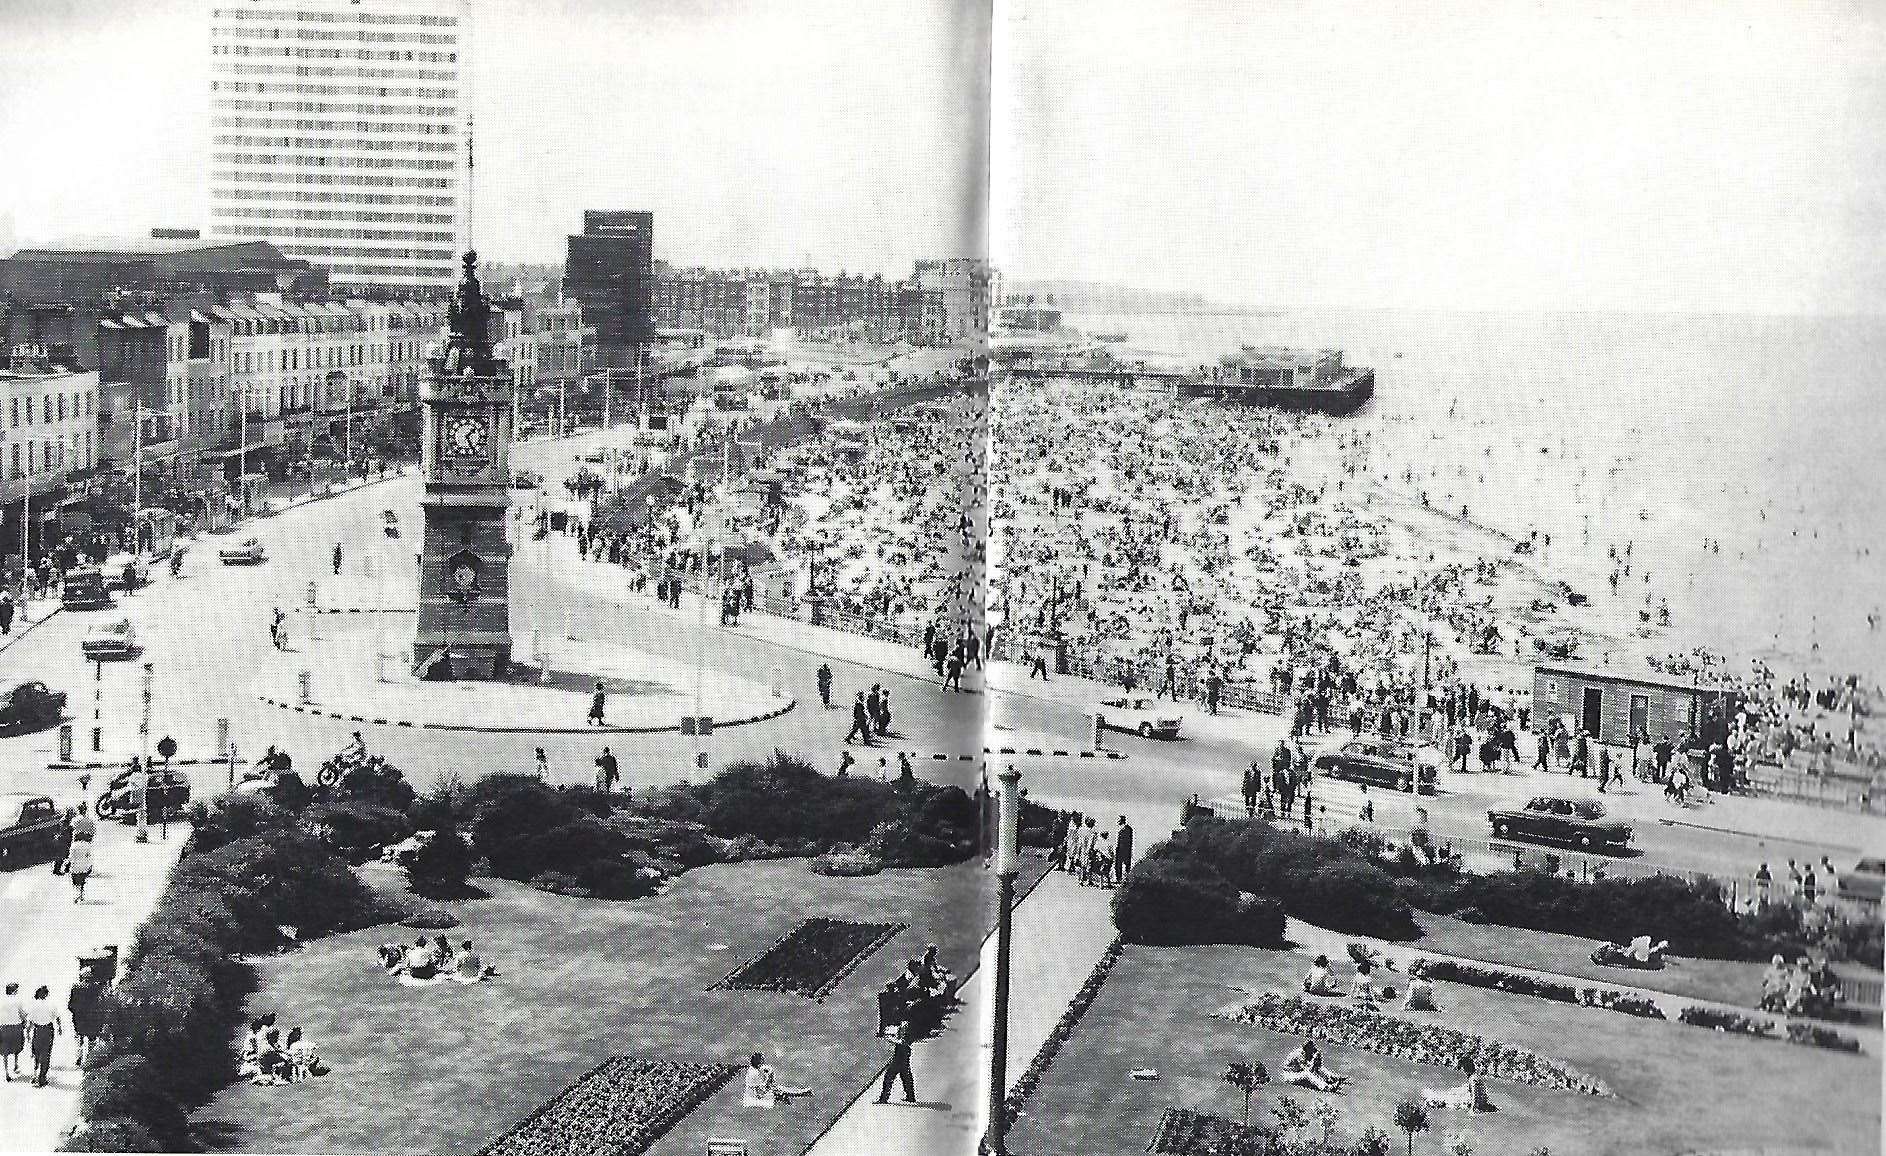 A crowded beach at Margate in 1966